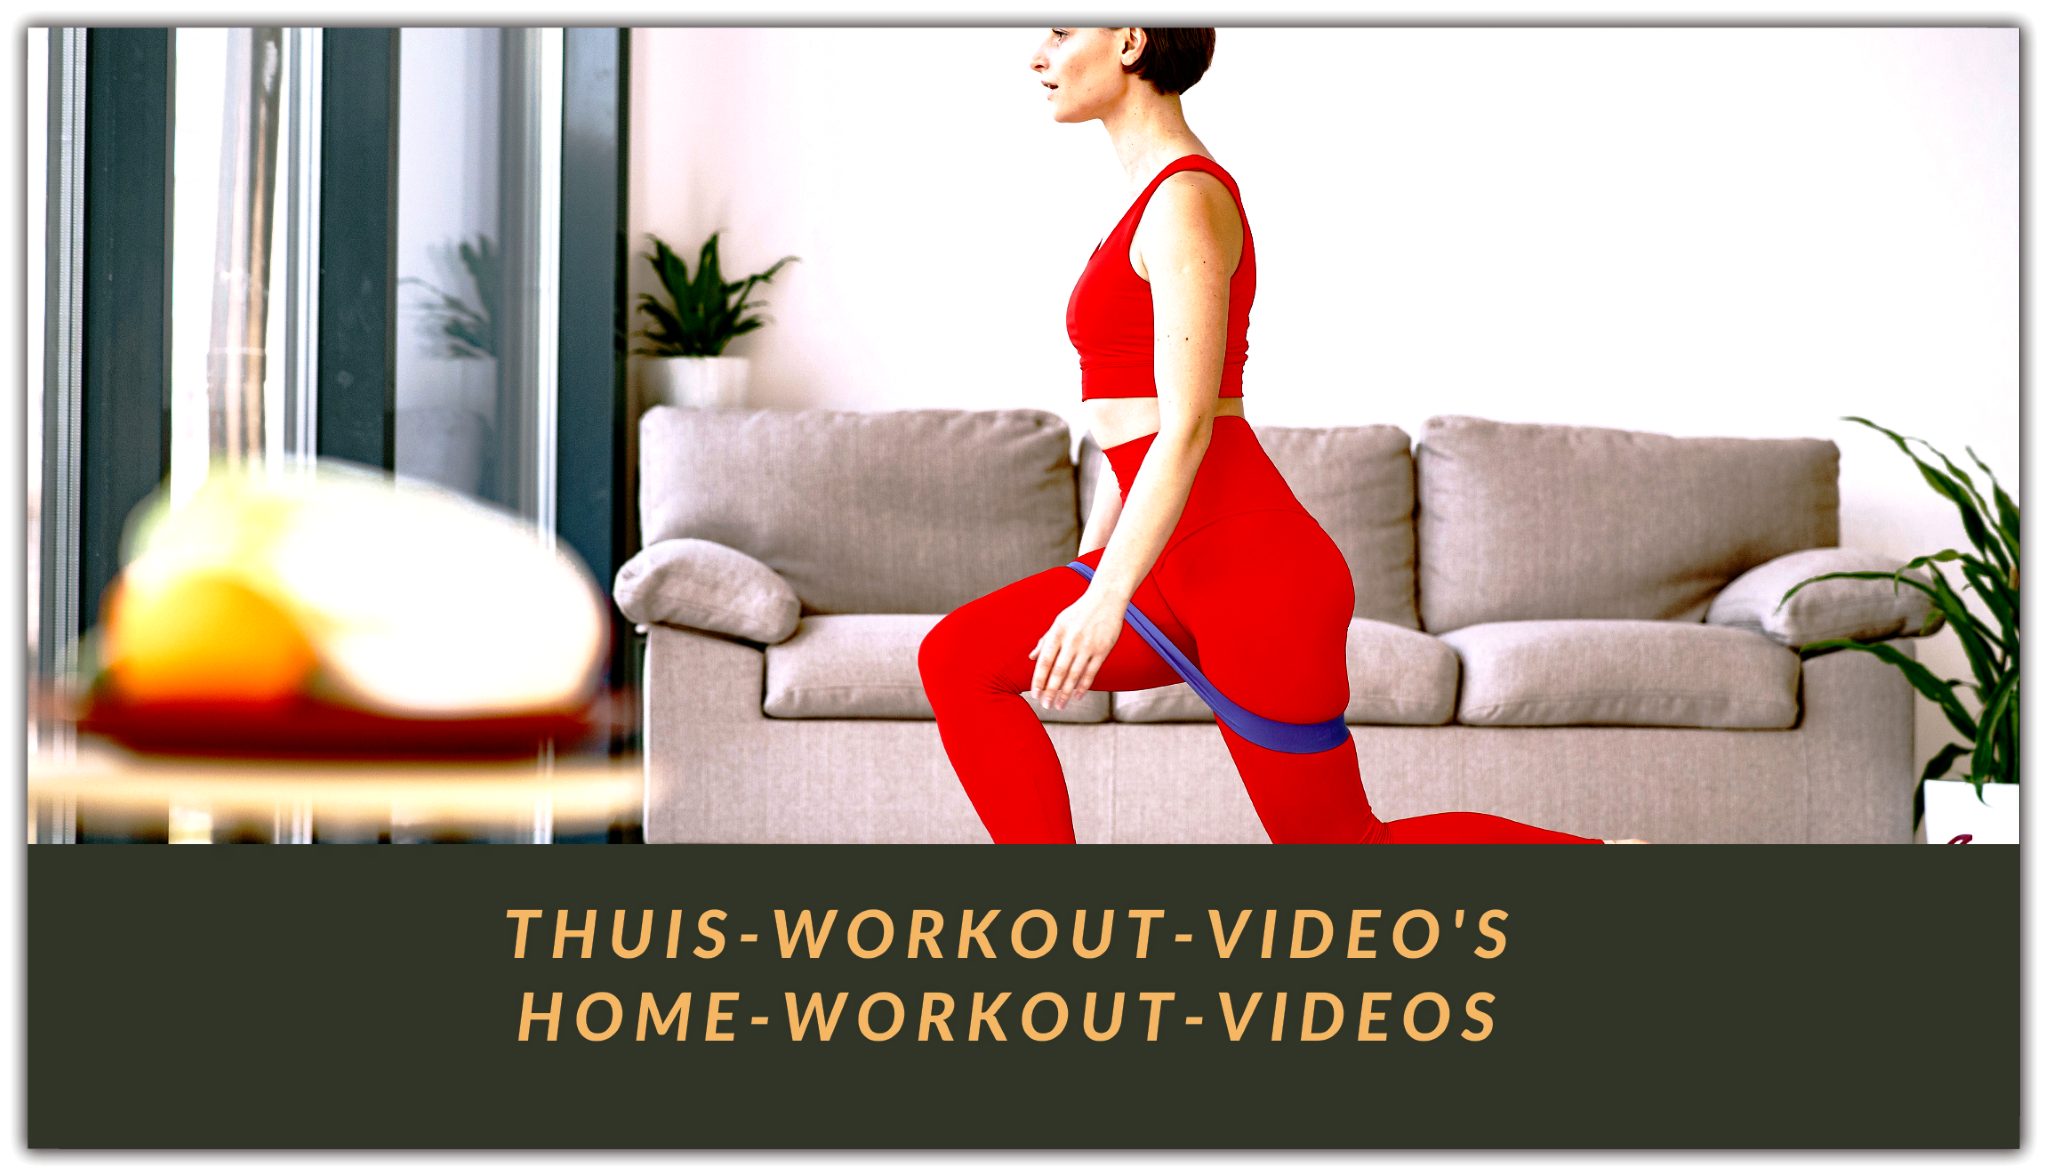 WORKOUT-VIDEO’S VAN THUIS ||HOME-WORKOUT-VIDEO’S